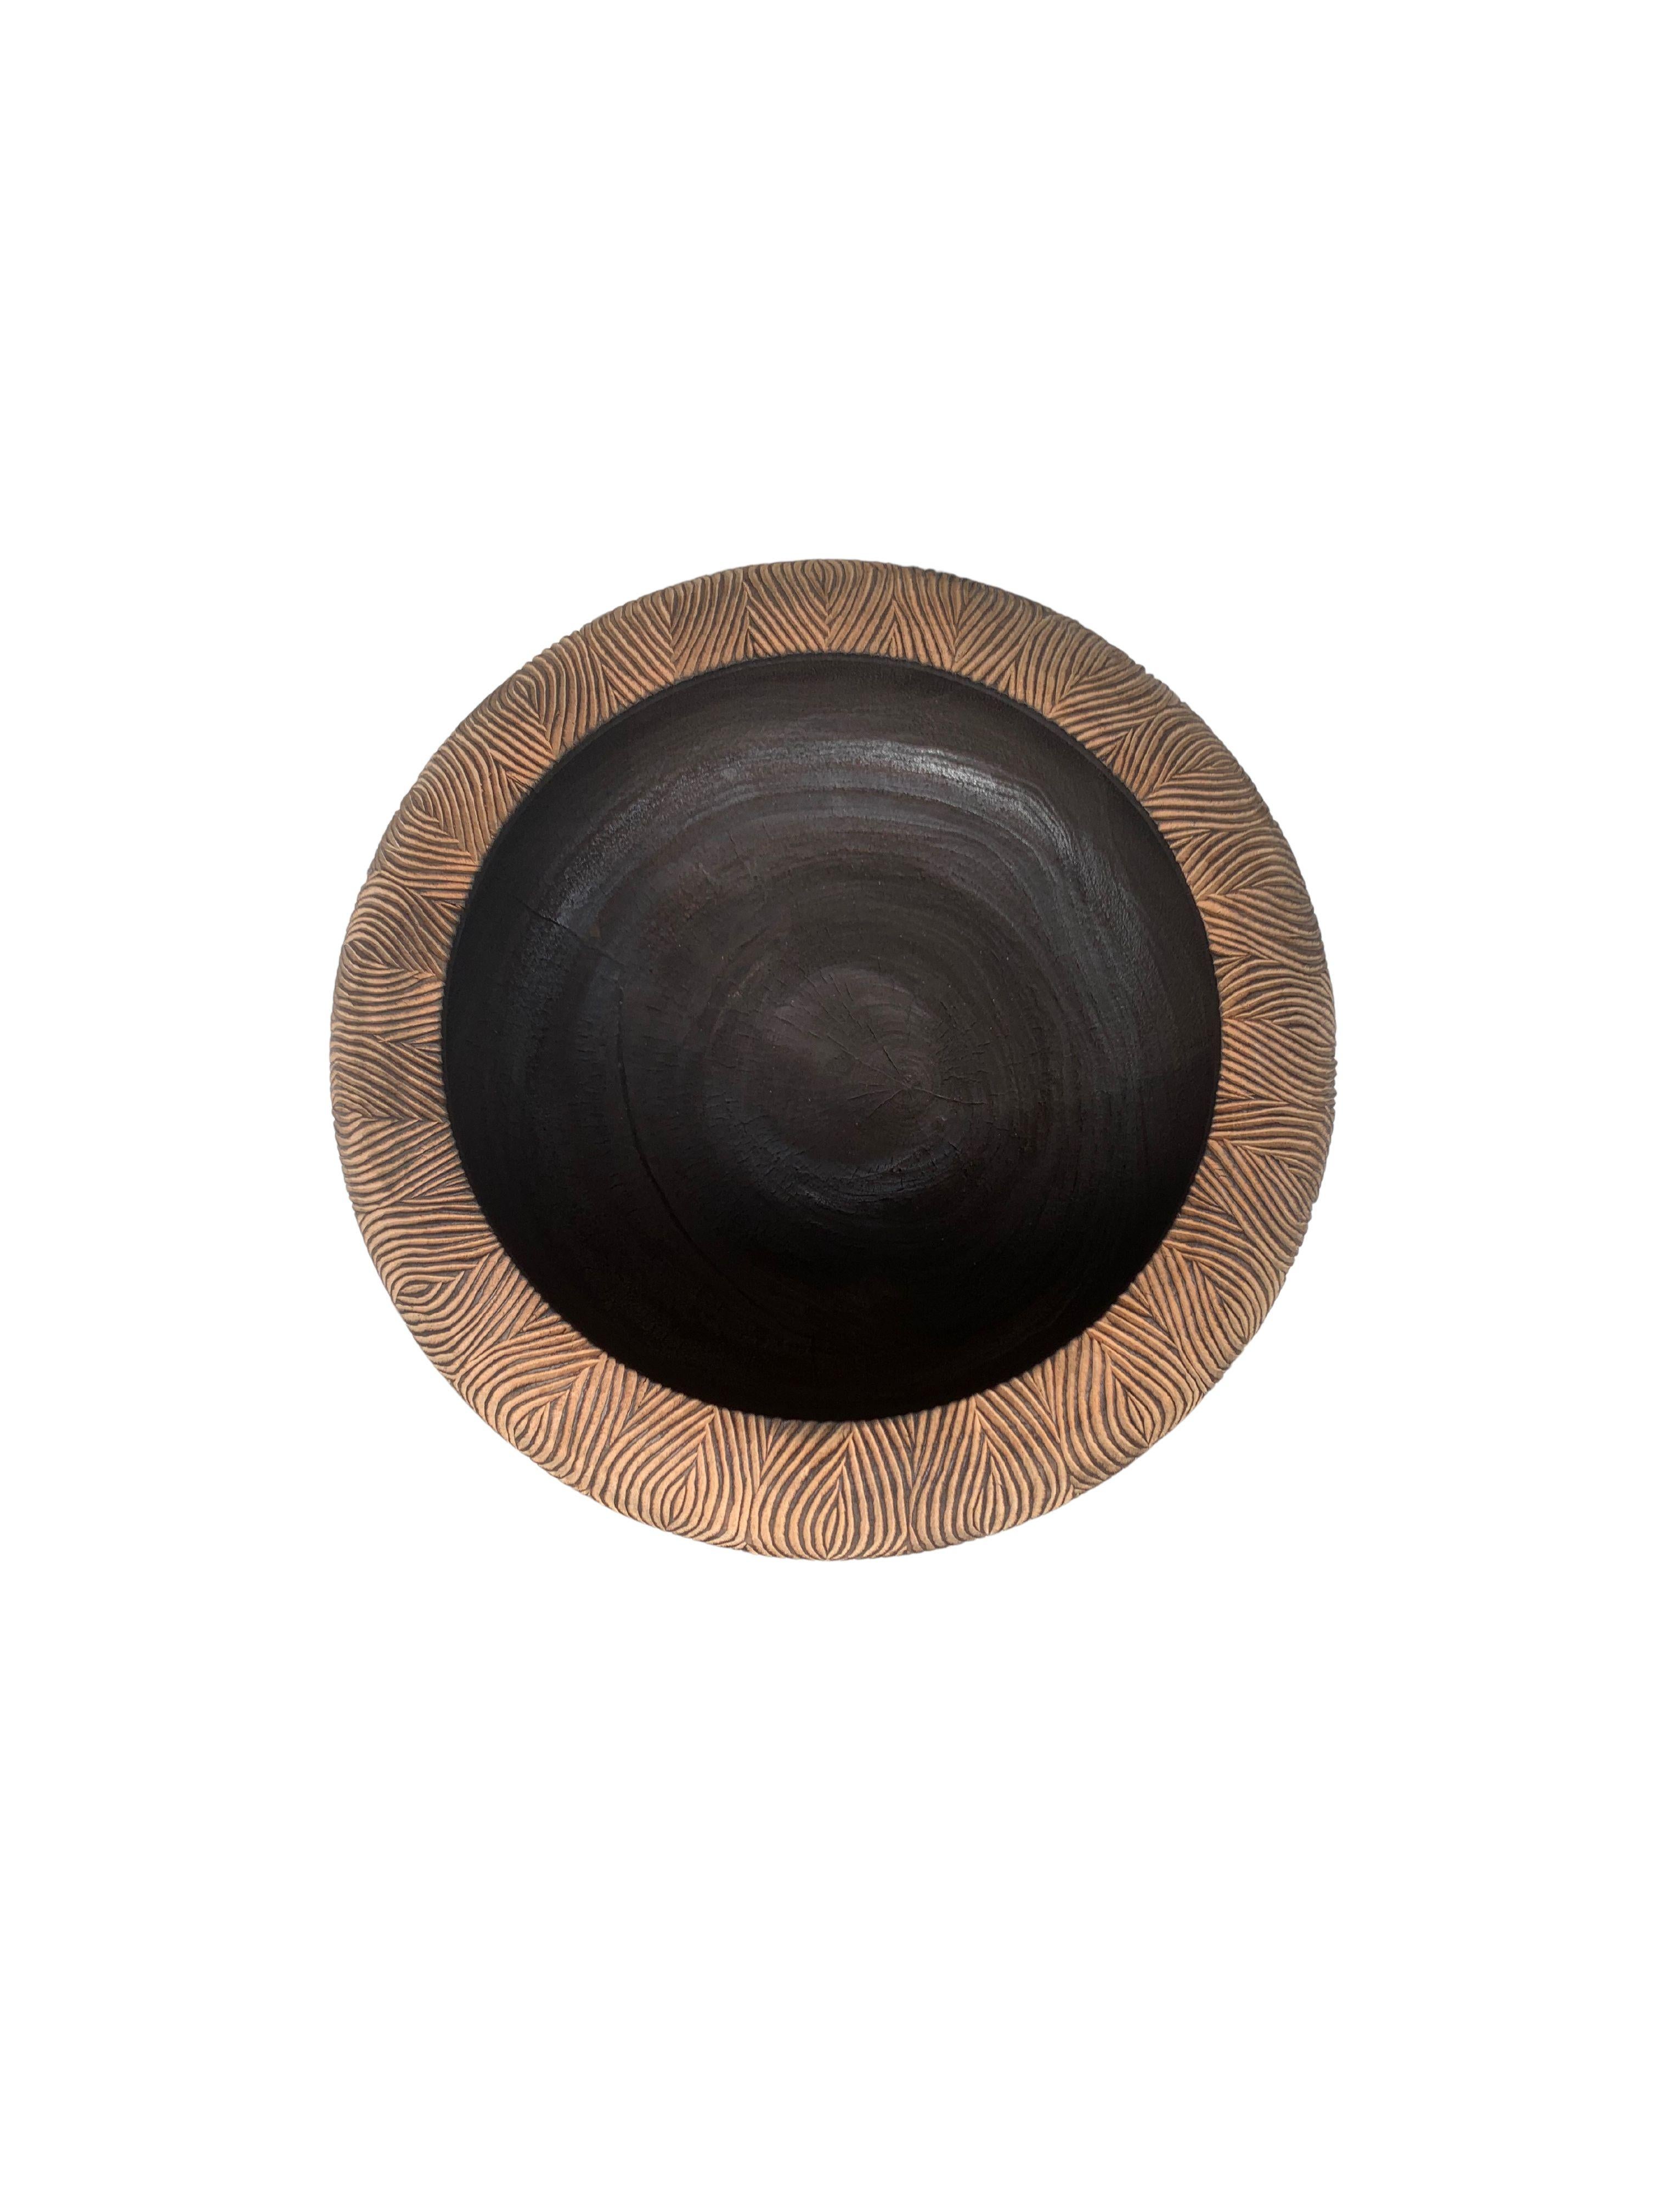 Indonesian Solid Mango Wood Bowl with Carved Exterior & Burnt Finish For Sale